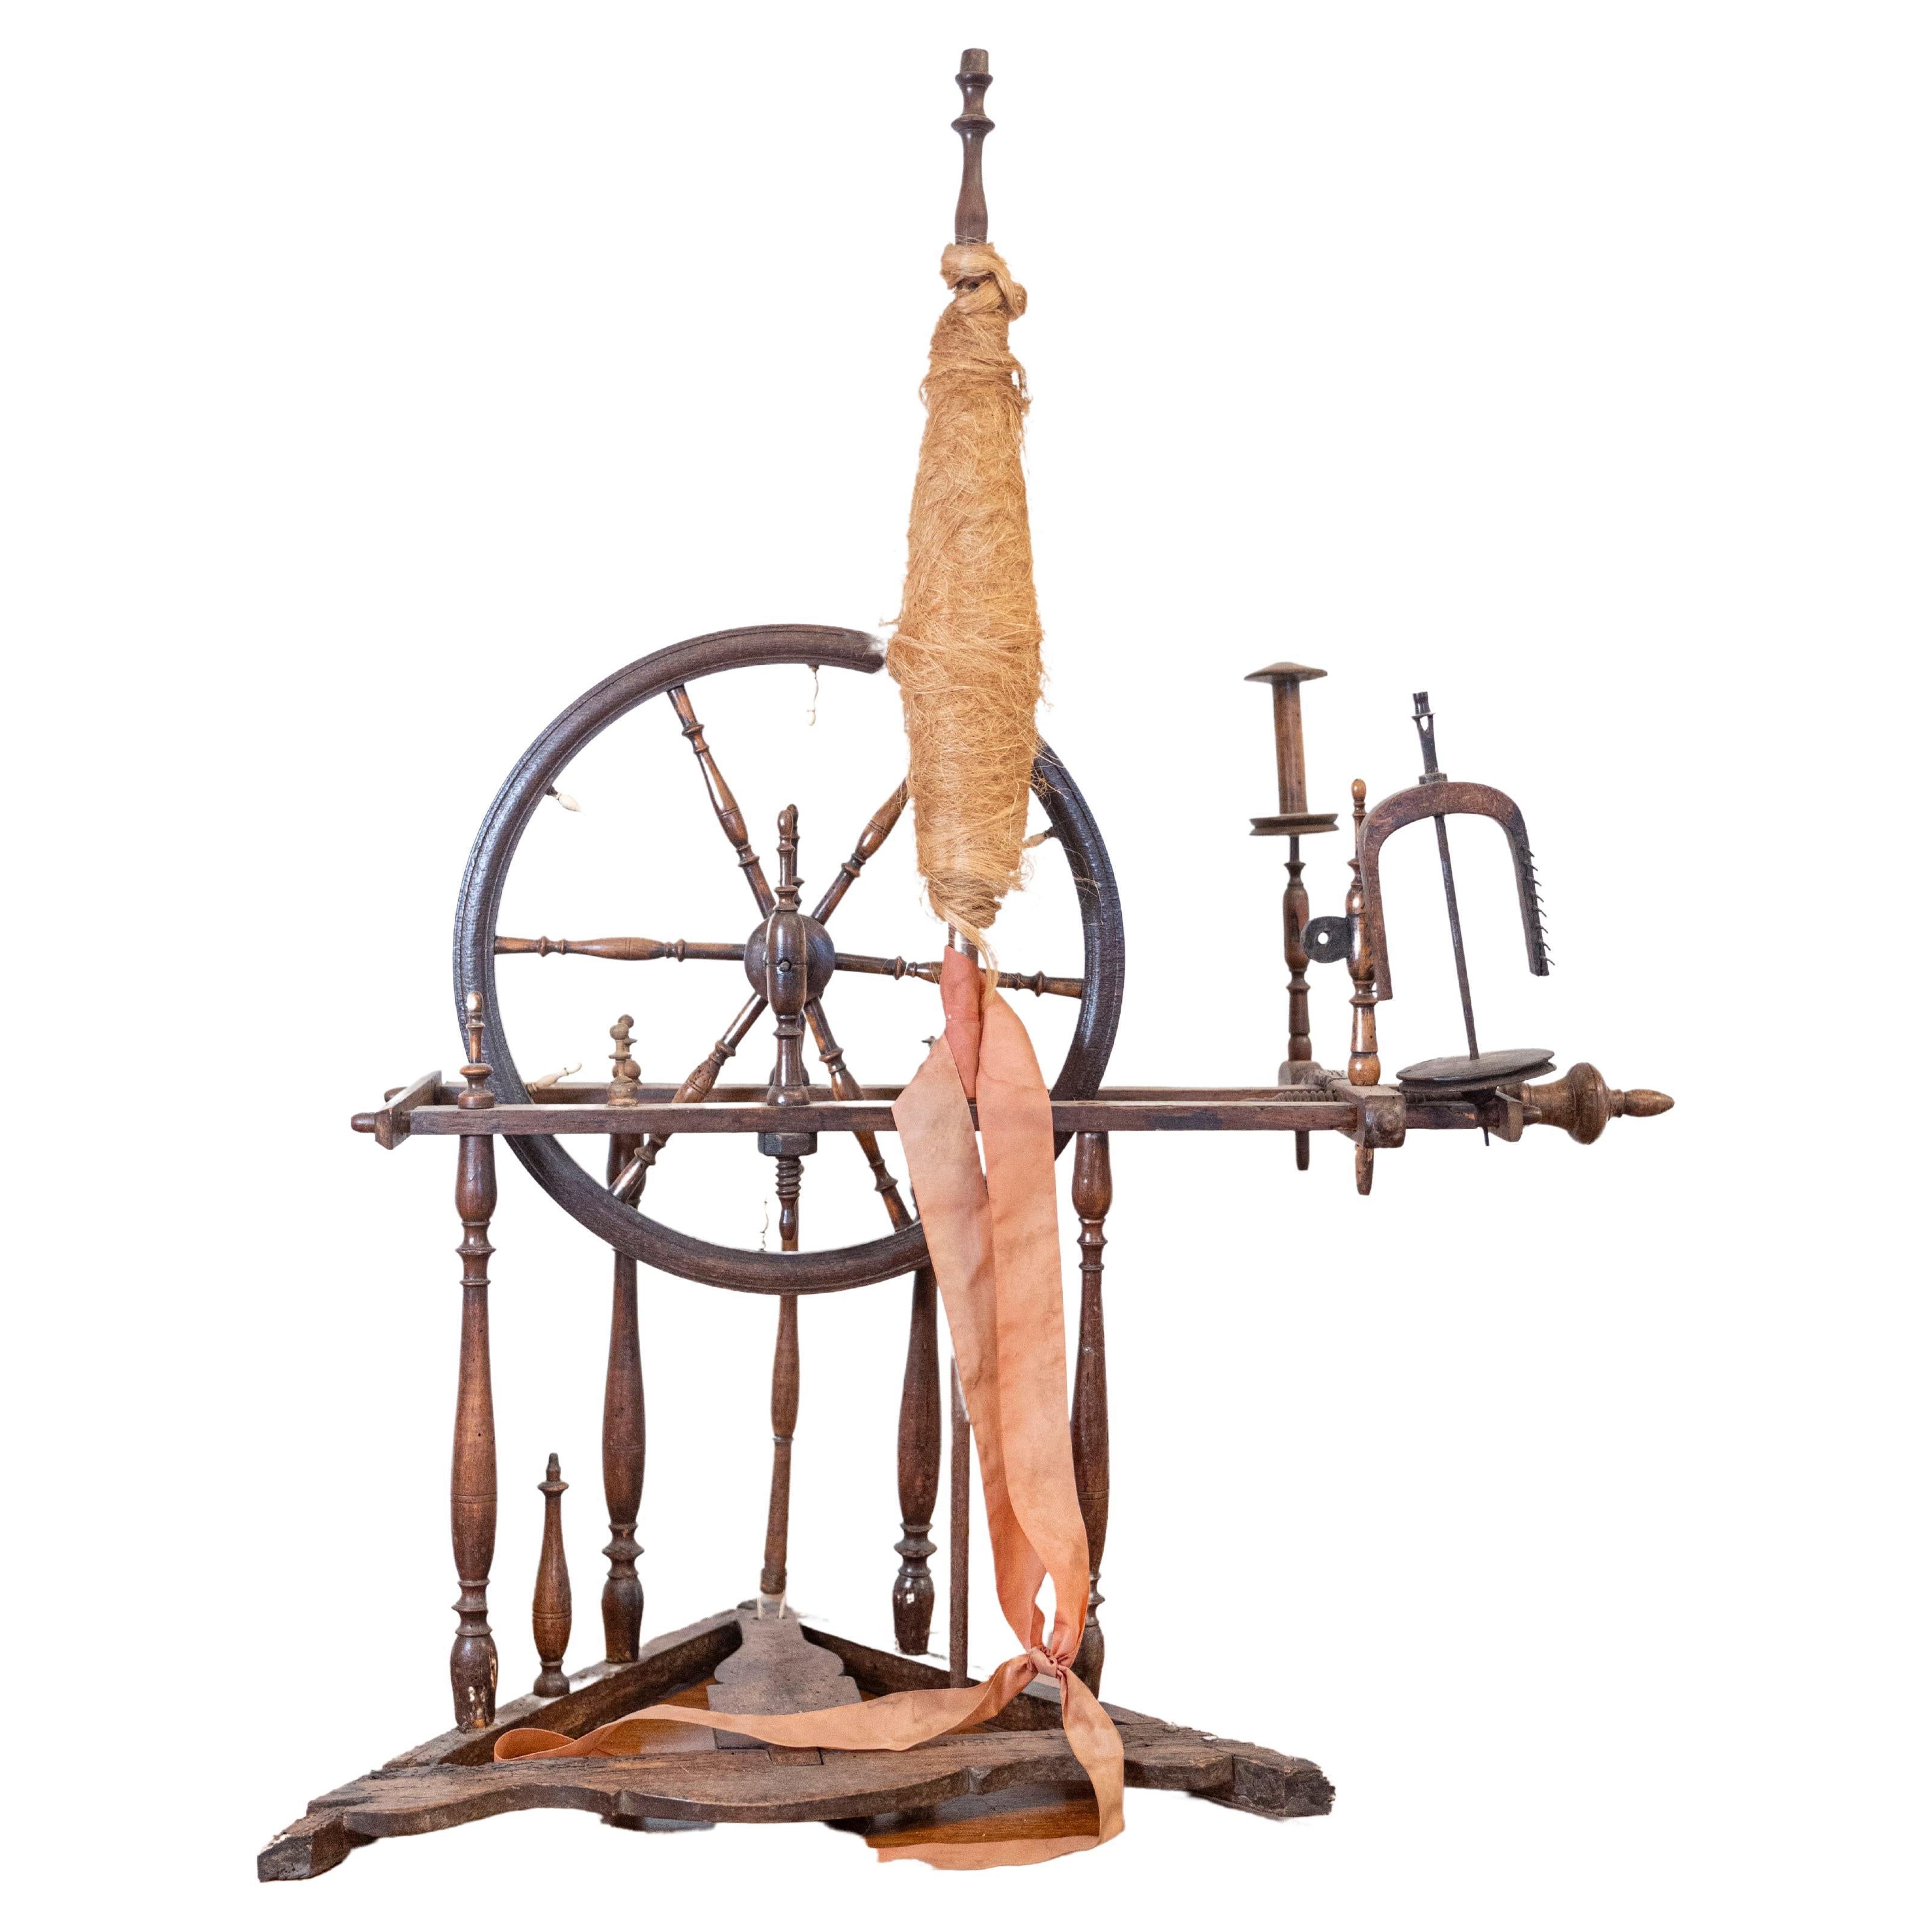 Rustic French Spinning Wheel with Original Parts from the 18th Century